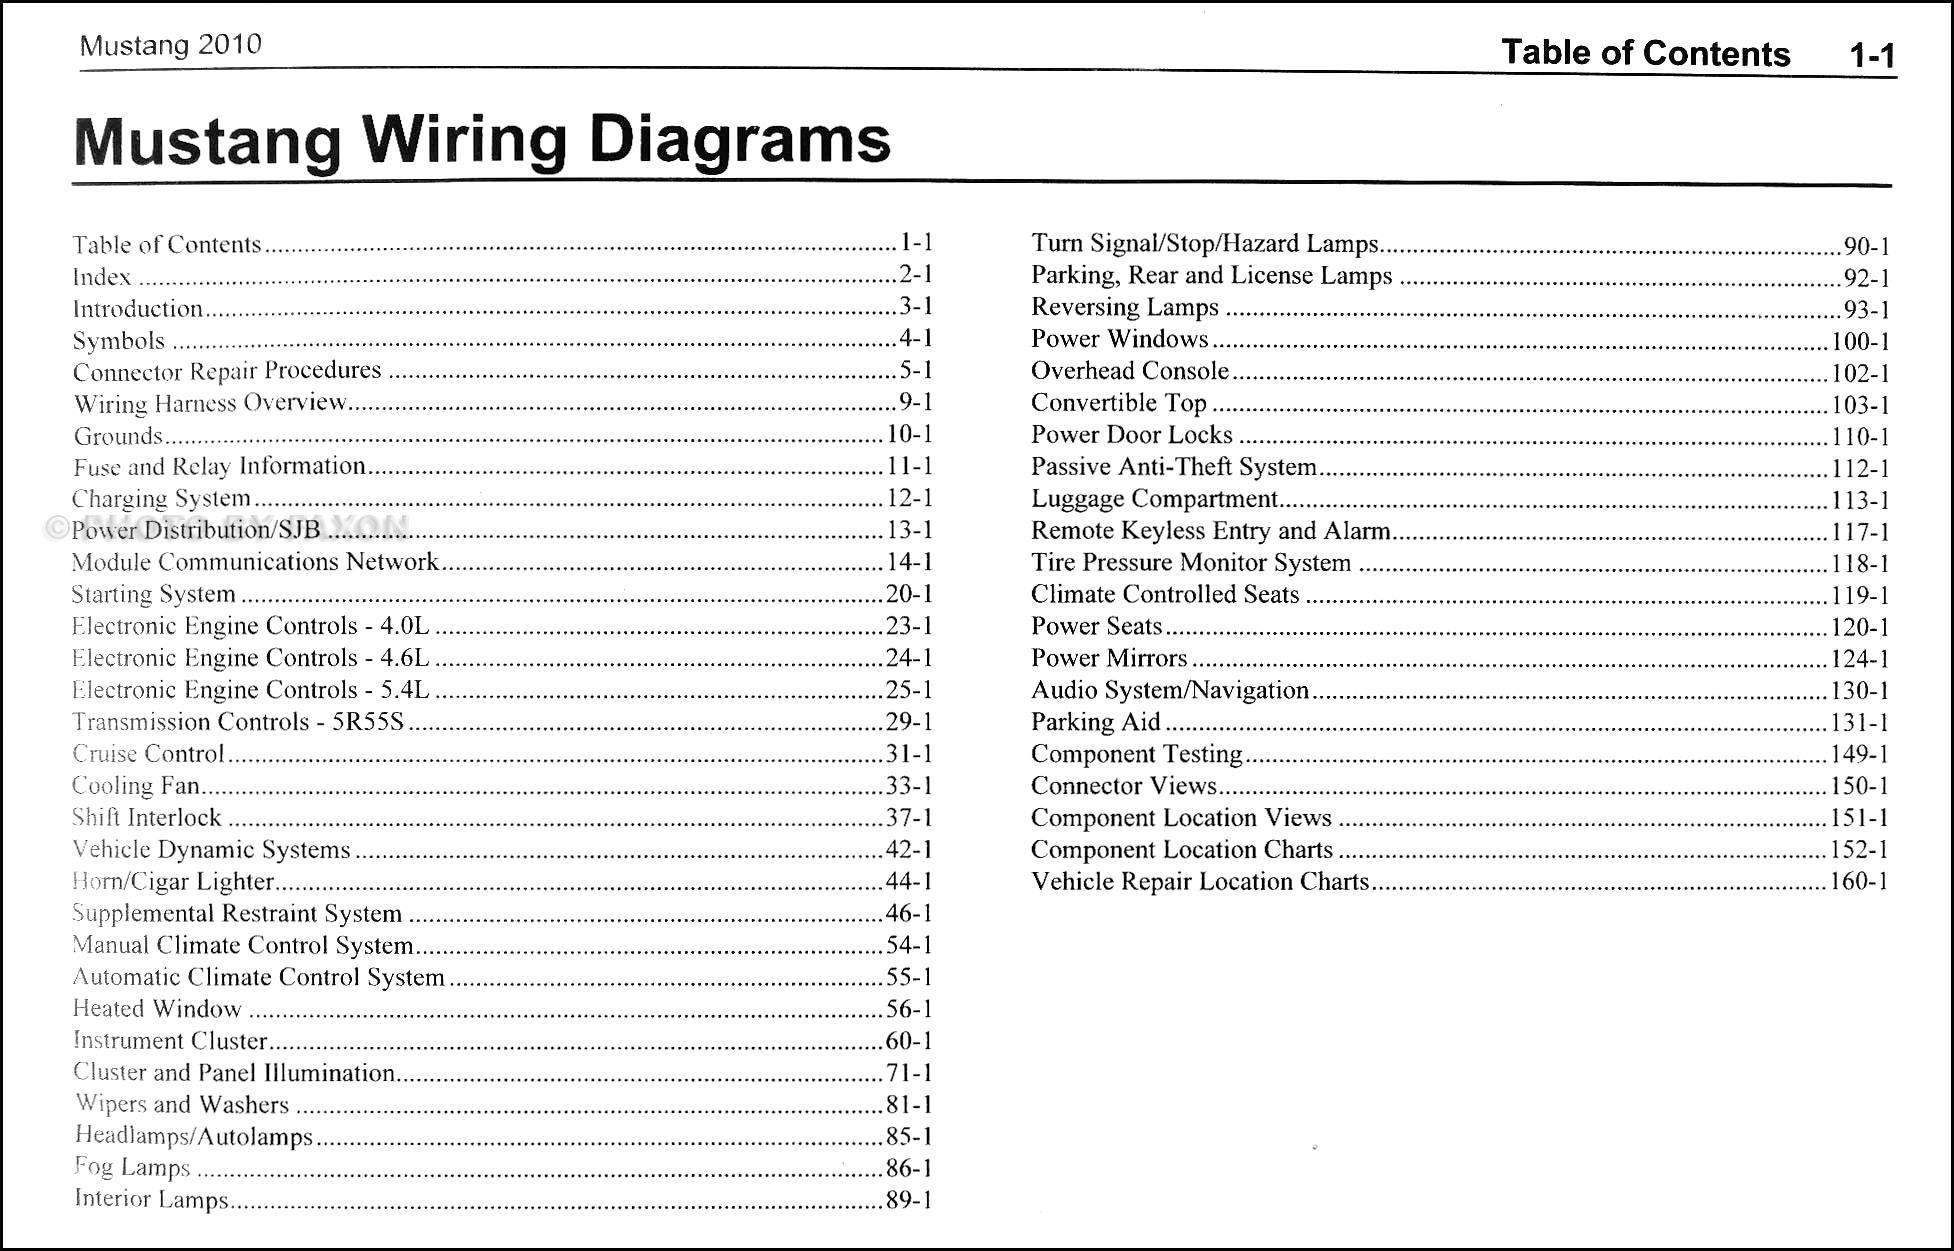 1998 Kia Sportage Stereo Wiring Diagram New 2000 Ford Mustang In 2001 Radio